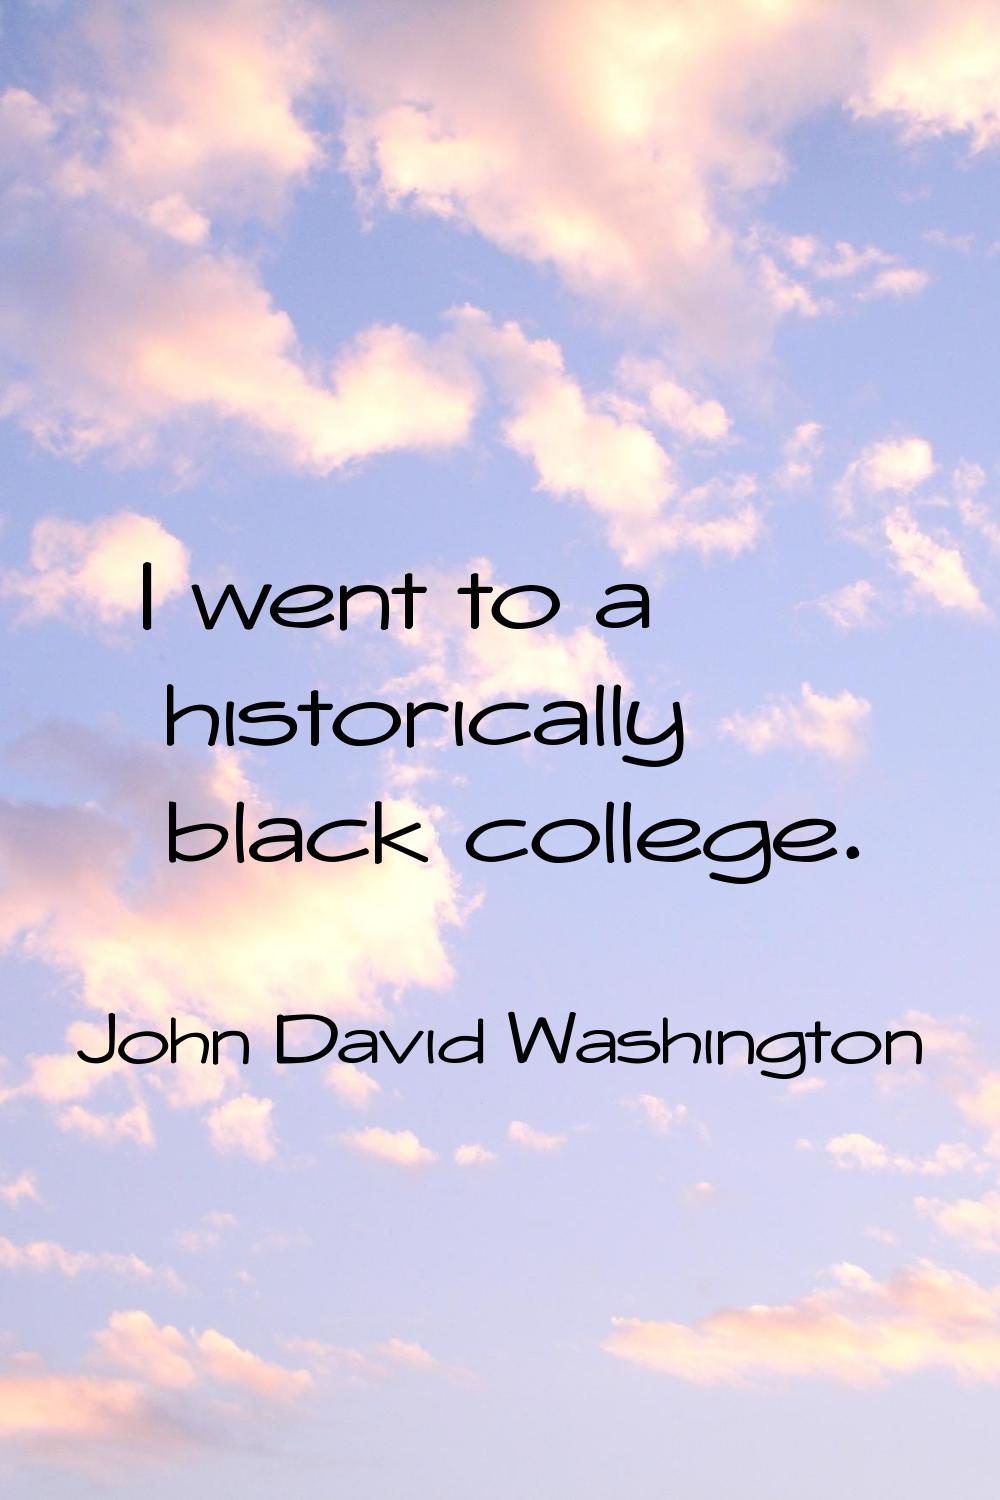 I went to a historically black college.